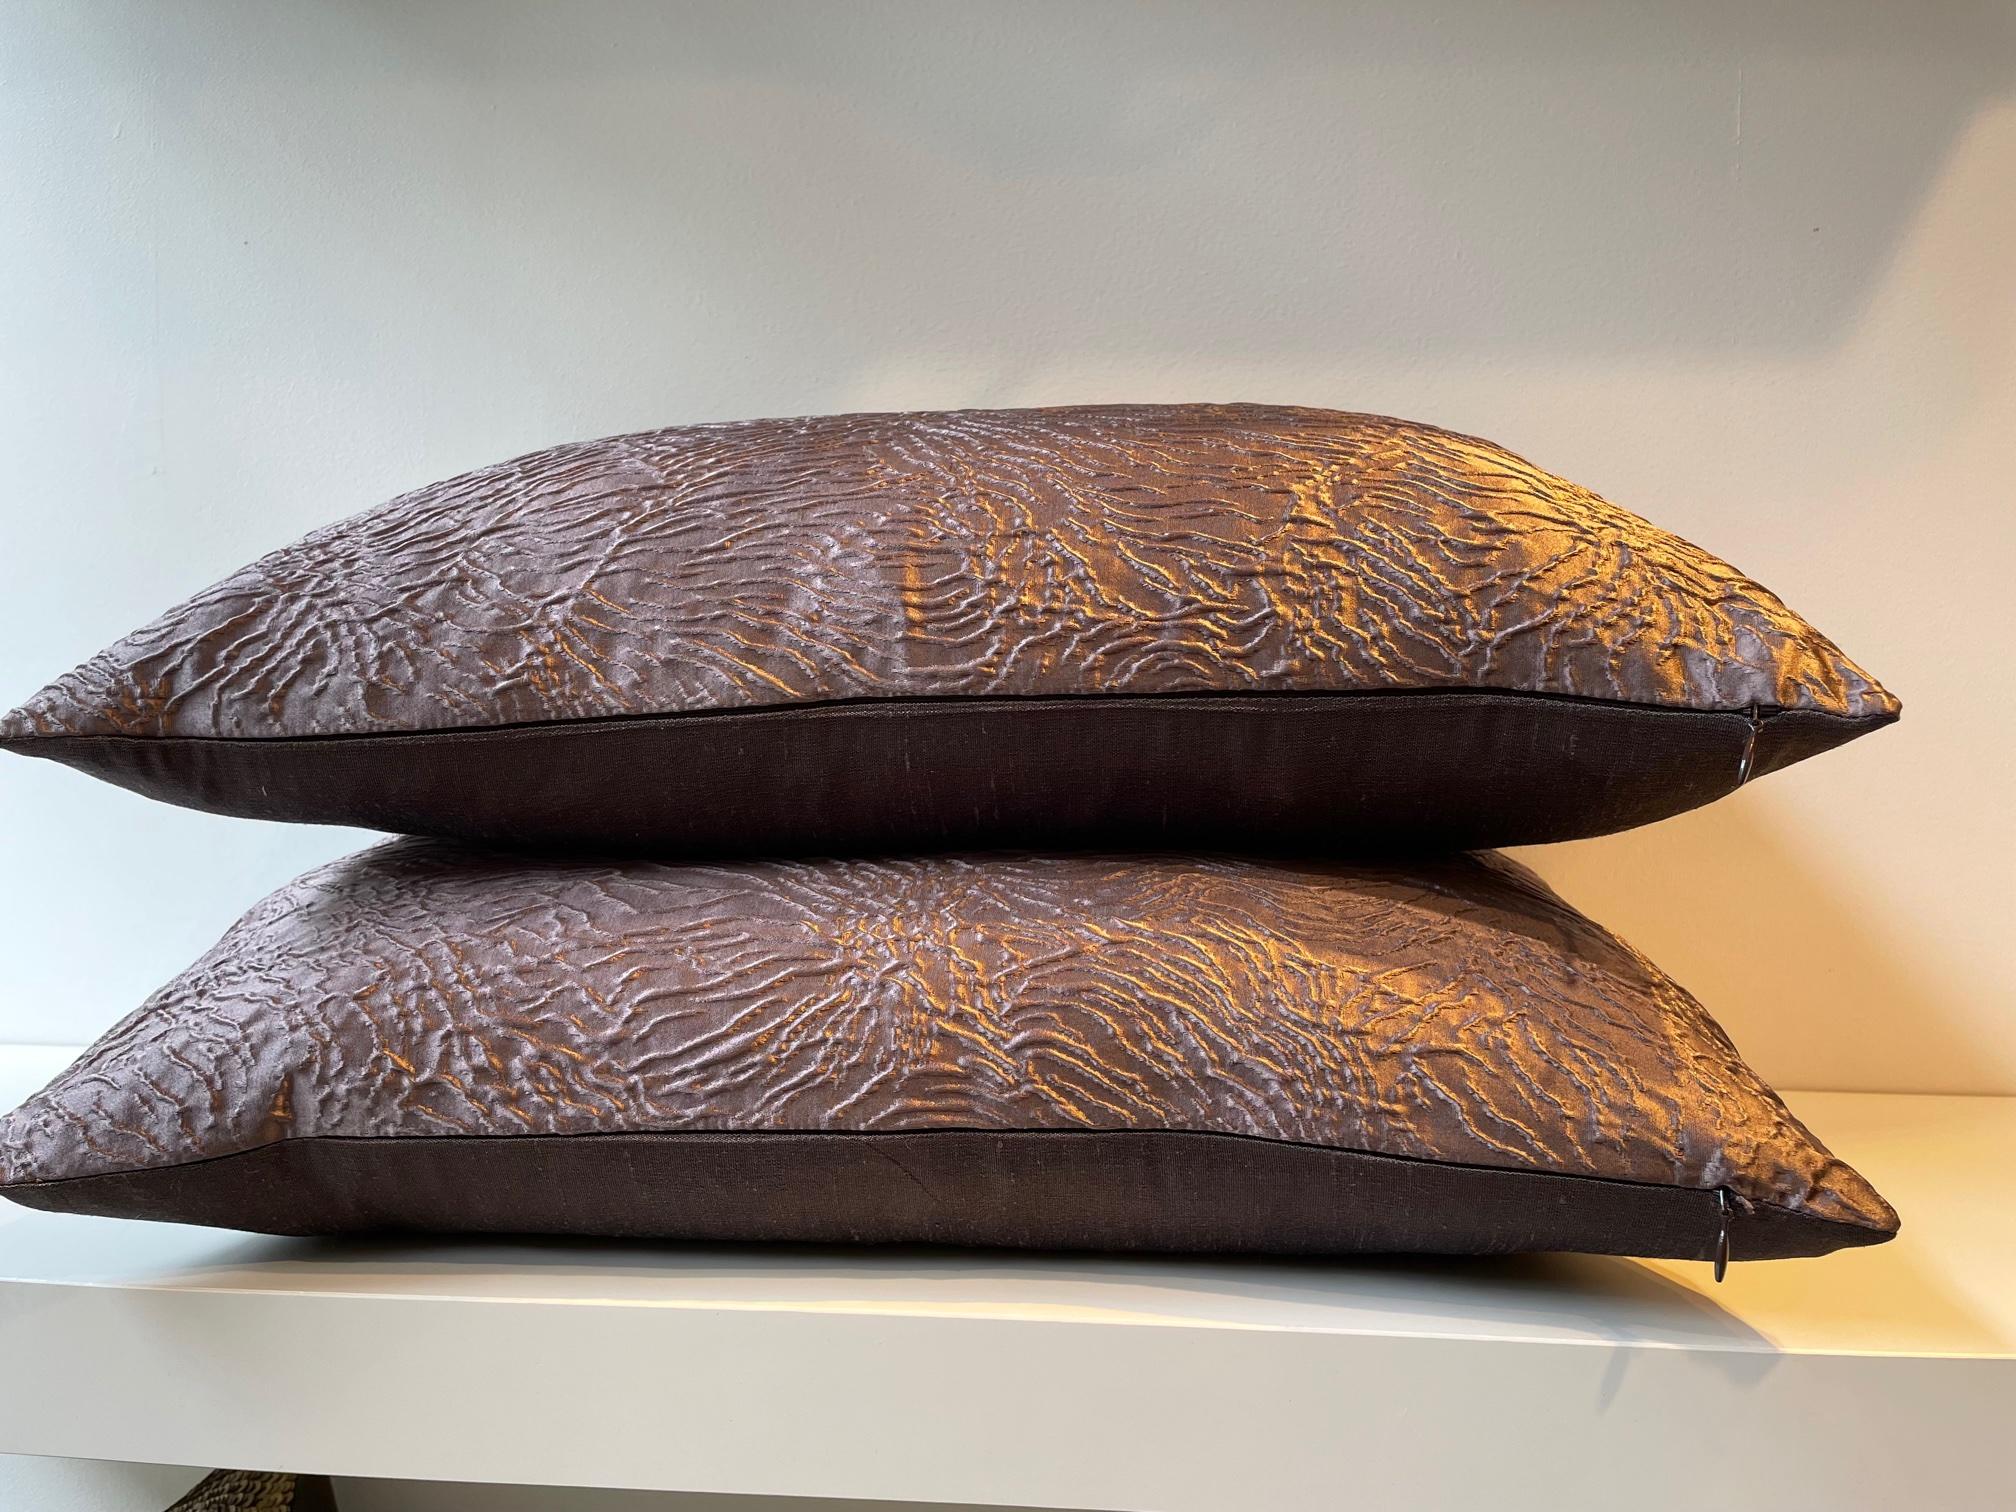 Pair of silk cushion covers Embossed floral design color heather at the front, plain hand woven silk color dark purple at the back, Concealed zip in the bottom seam,
Size 30 x 48cm.

As you can purchase for this cushion covers standard inner pads